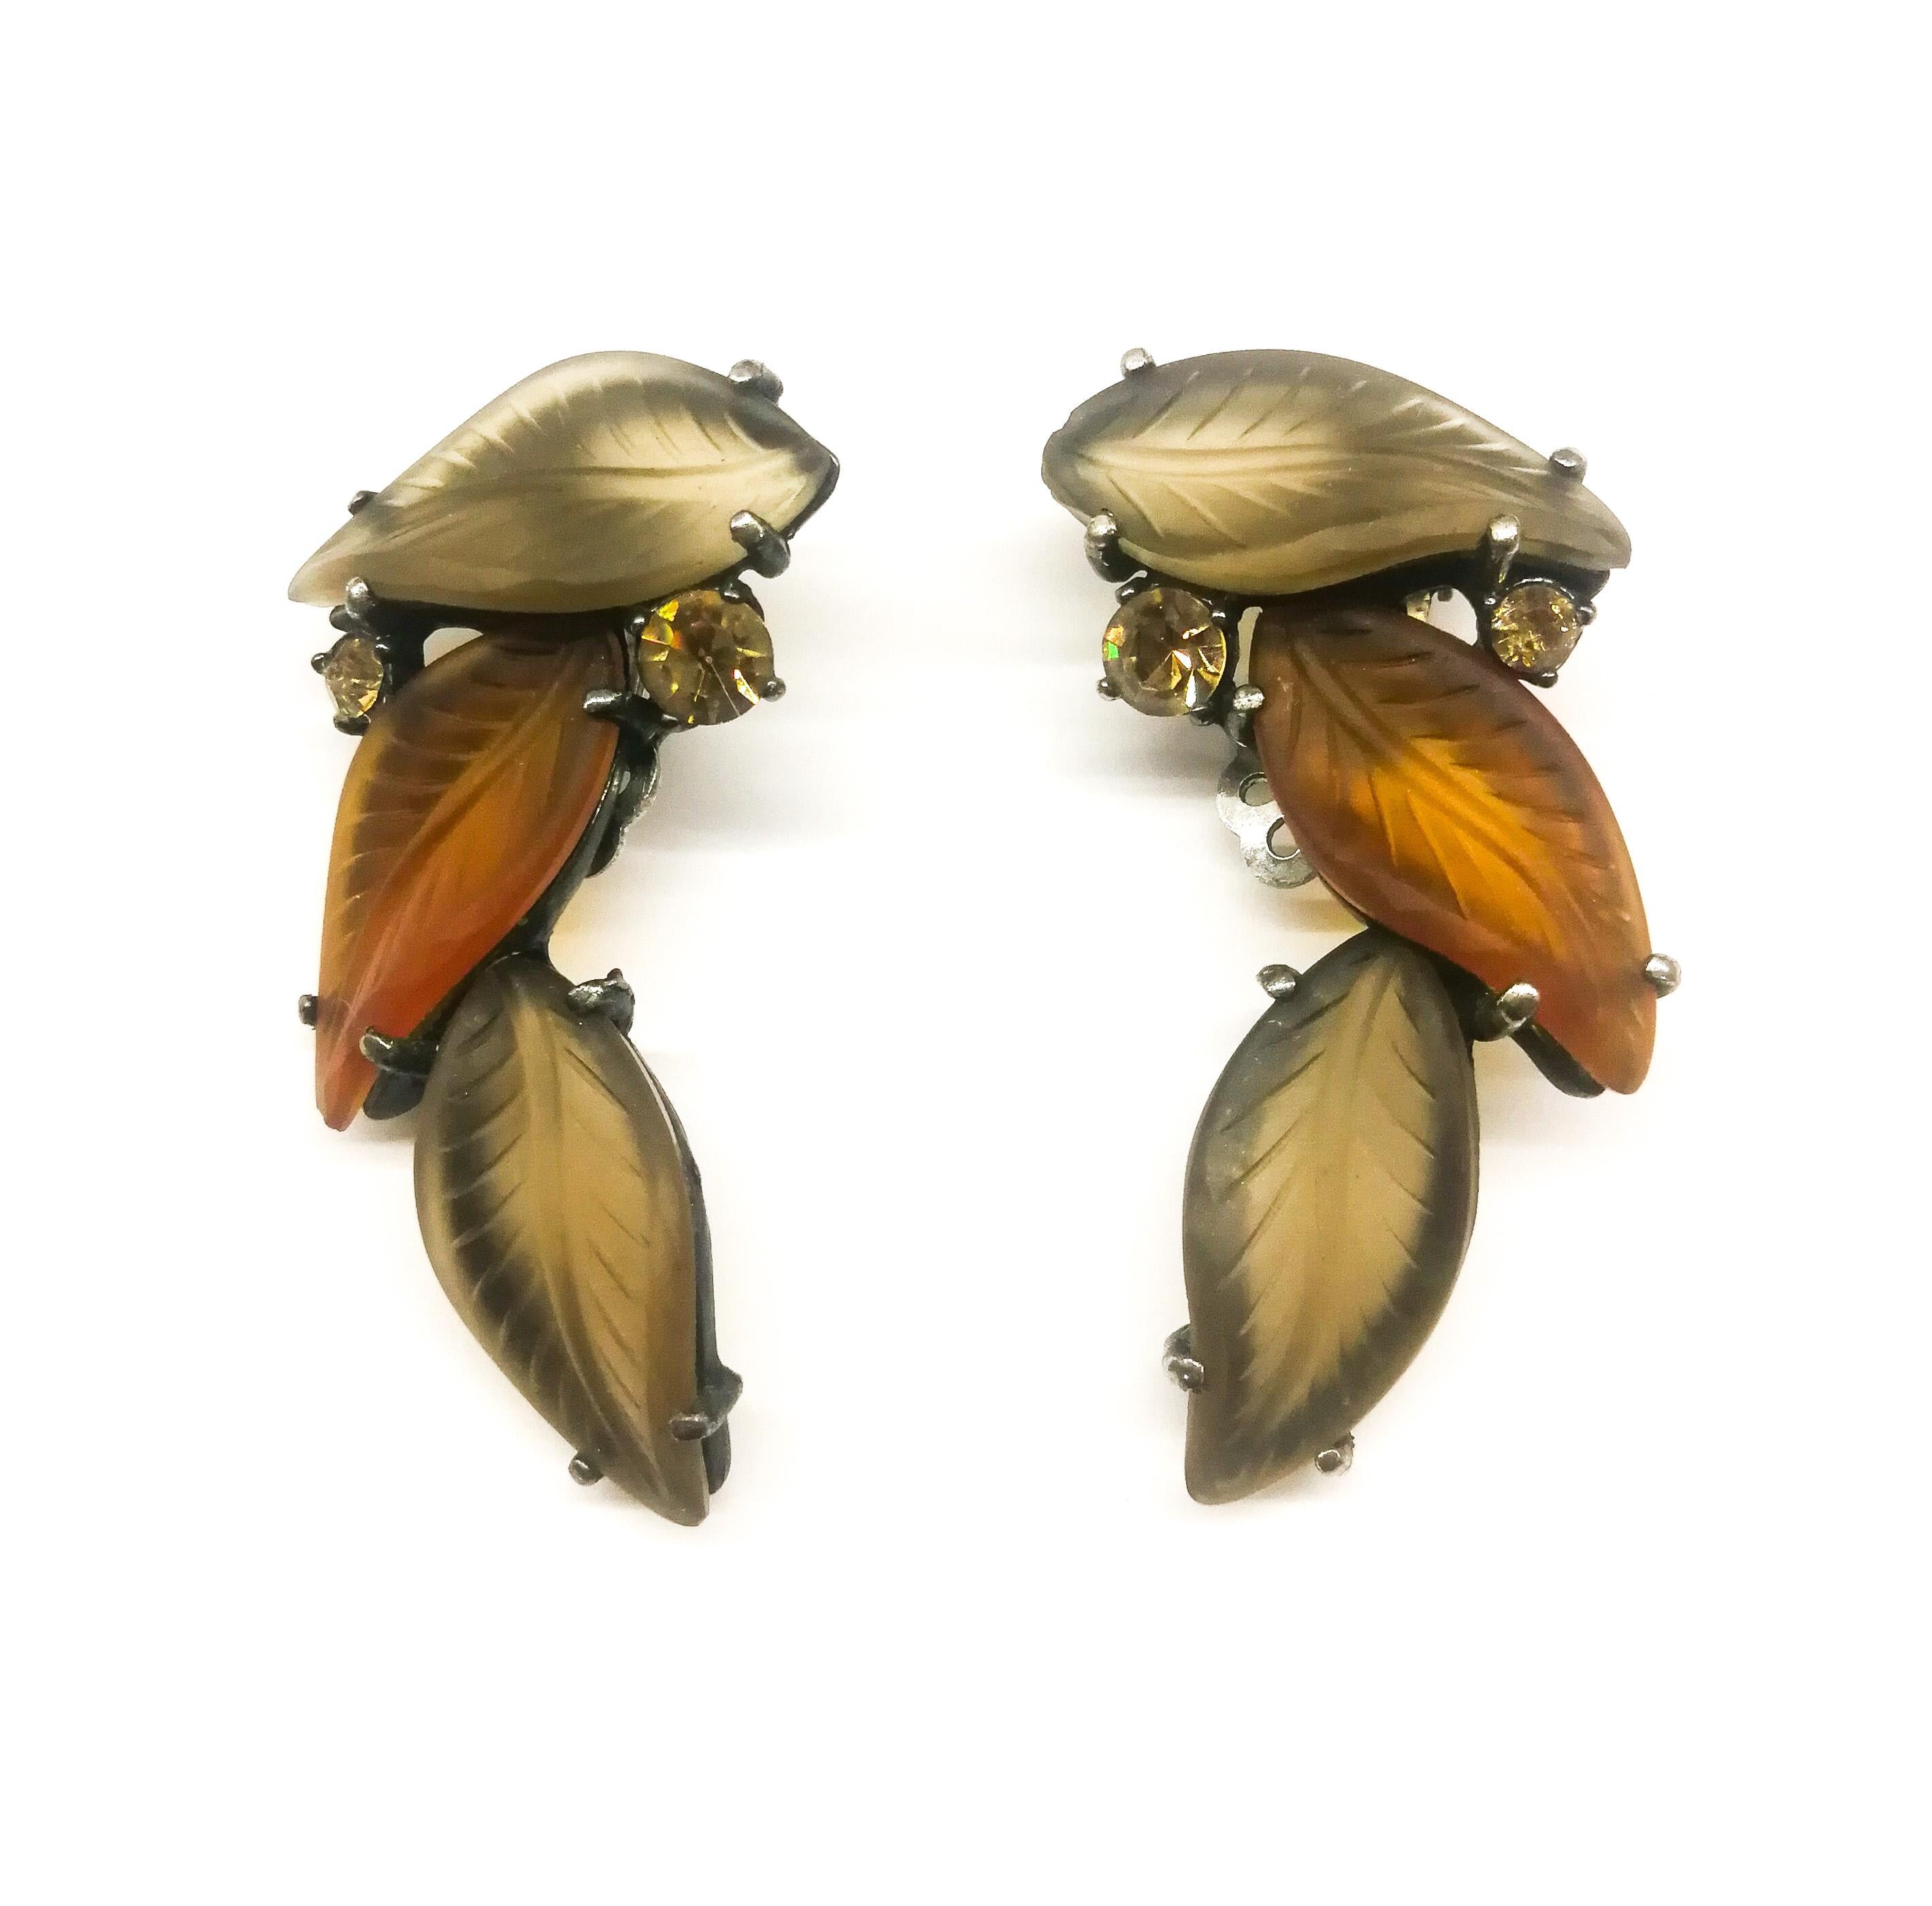 These sumptuous earrings are from the later period of Schiaparelli design, in the 1950s, but are one of her most striking and elegant creations. Reminiscent of Lalique glass, in soft, warm tones of brown, they sit beautifully on the ear, flat and